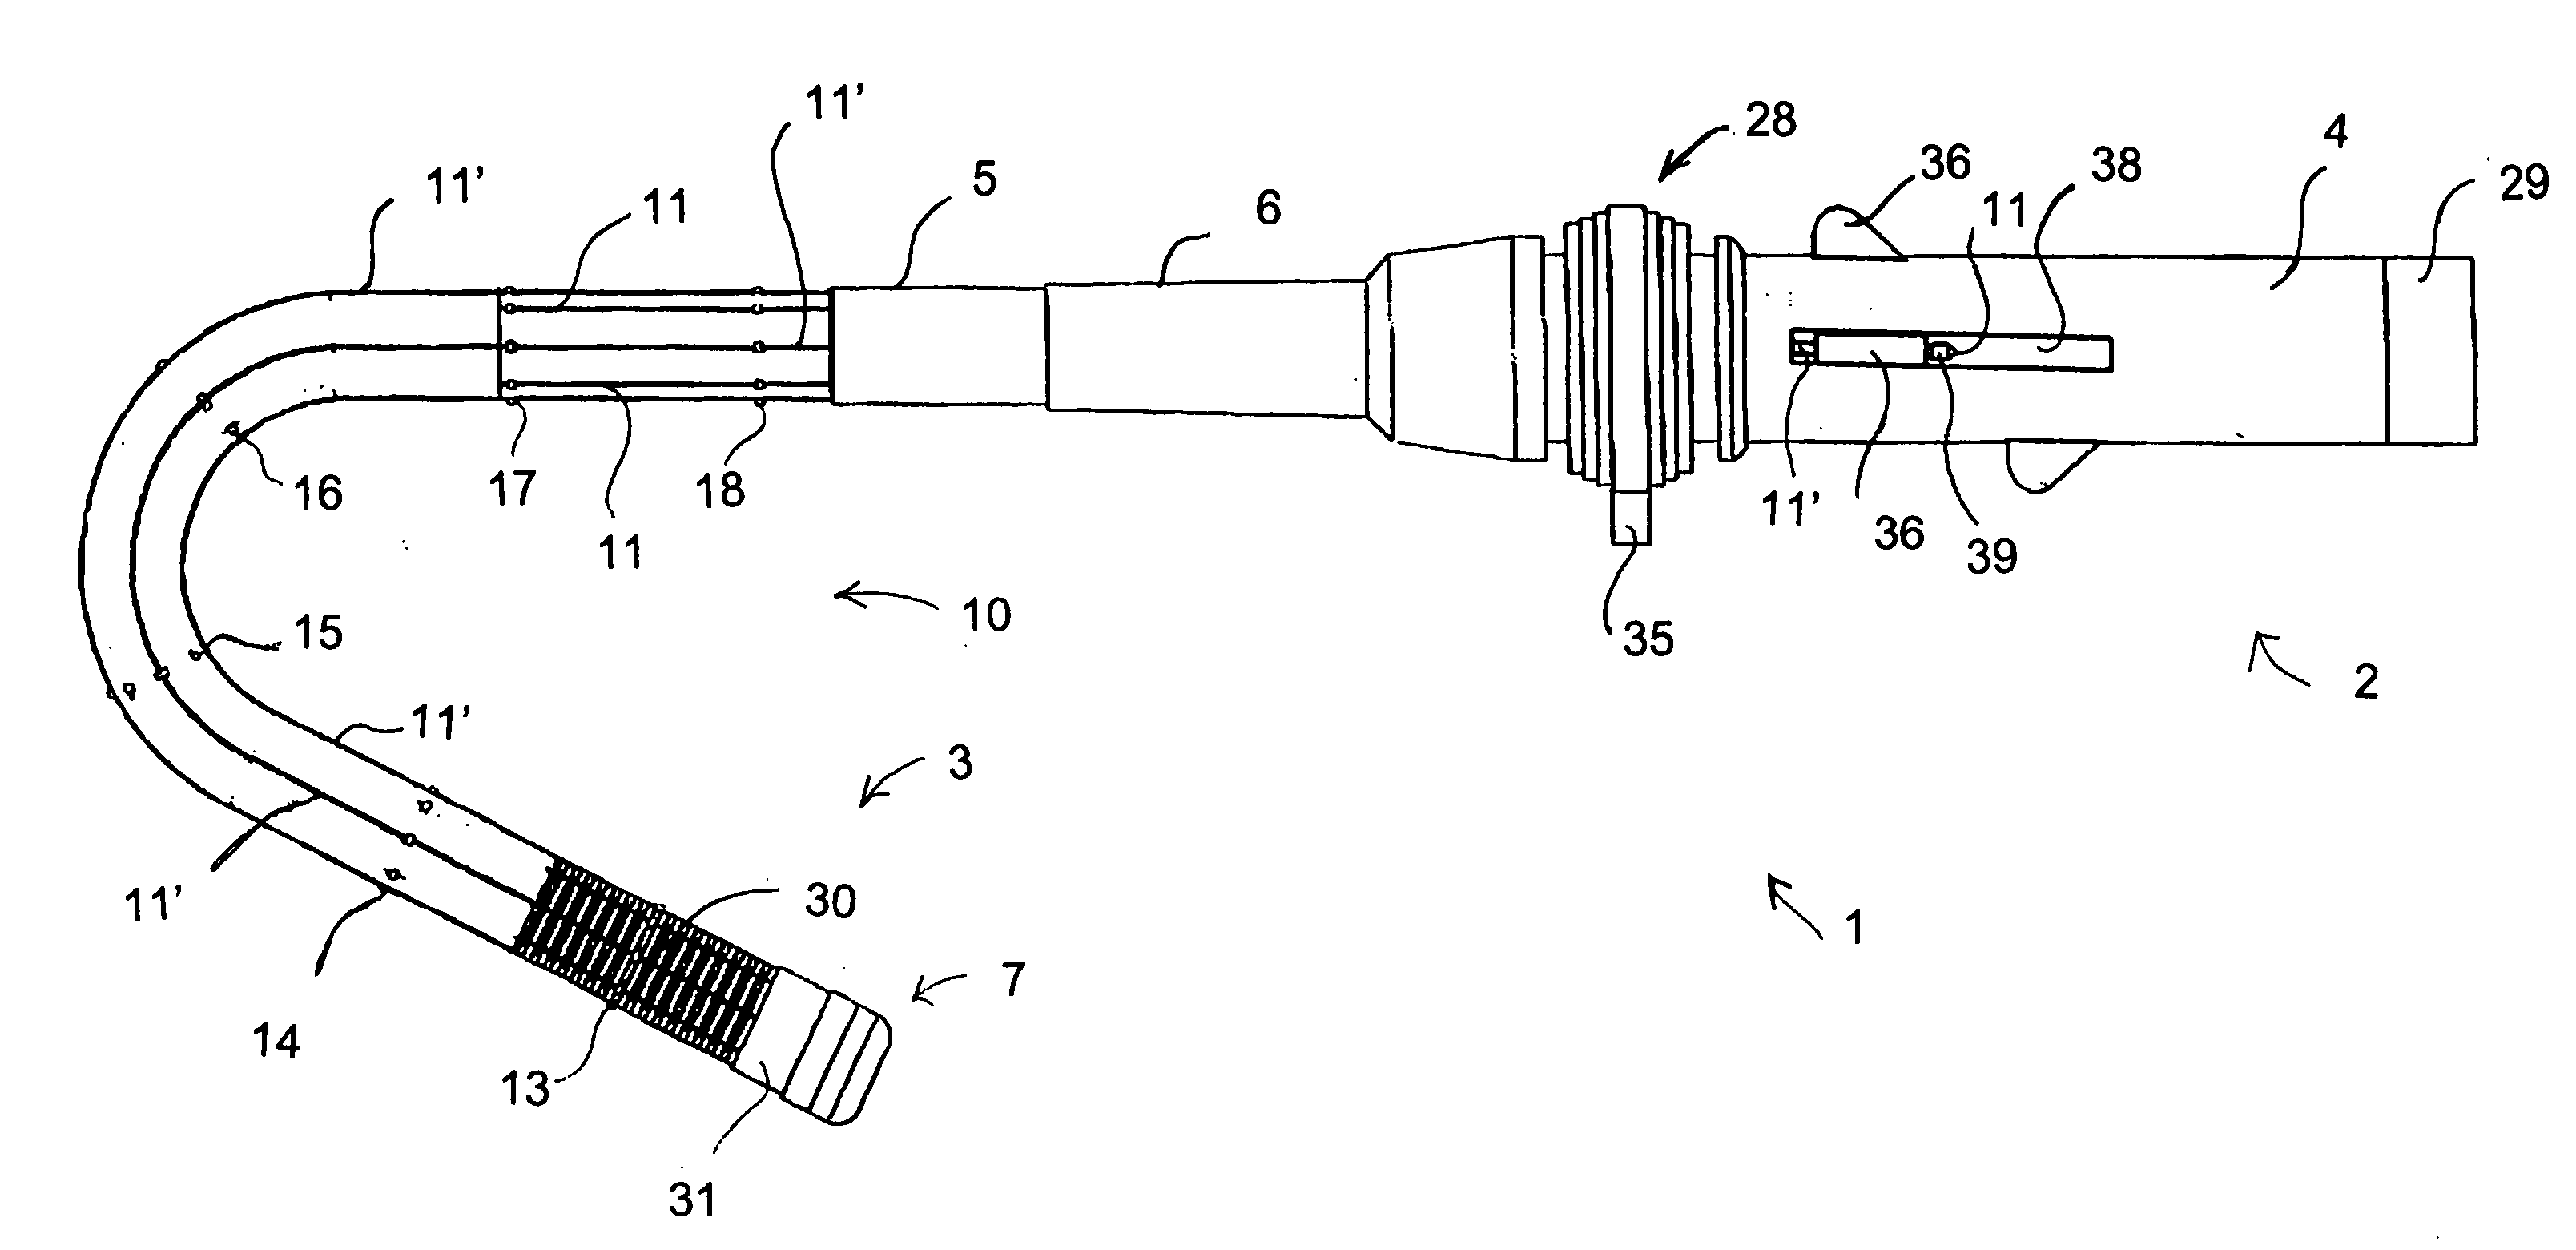 Torque-transmitting, variably-flexible, corrugated insertion device and method for transmitting torque and variably flexing a corrugated insertion device